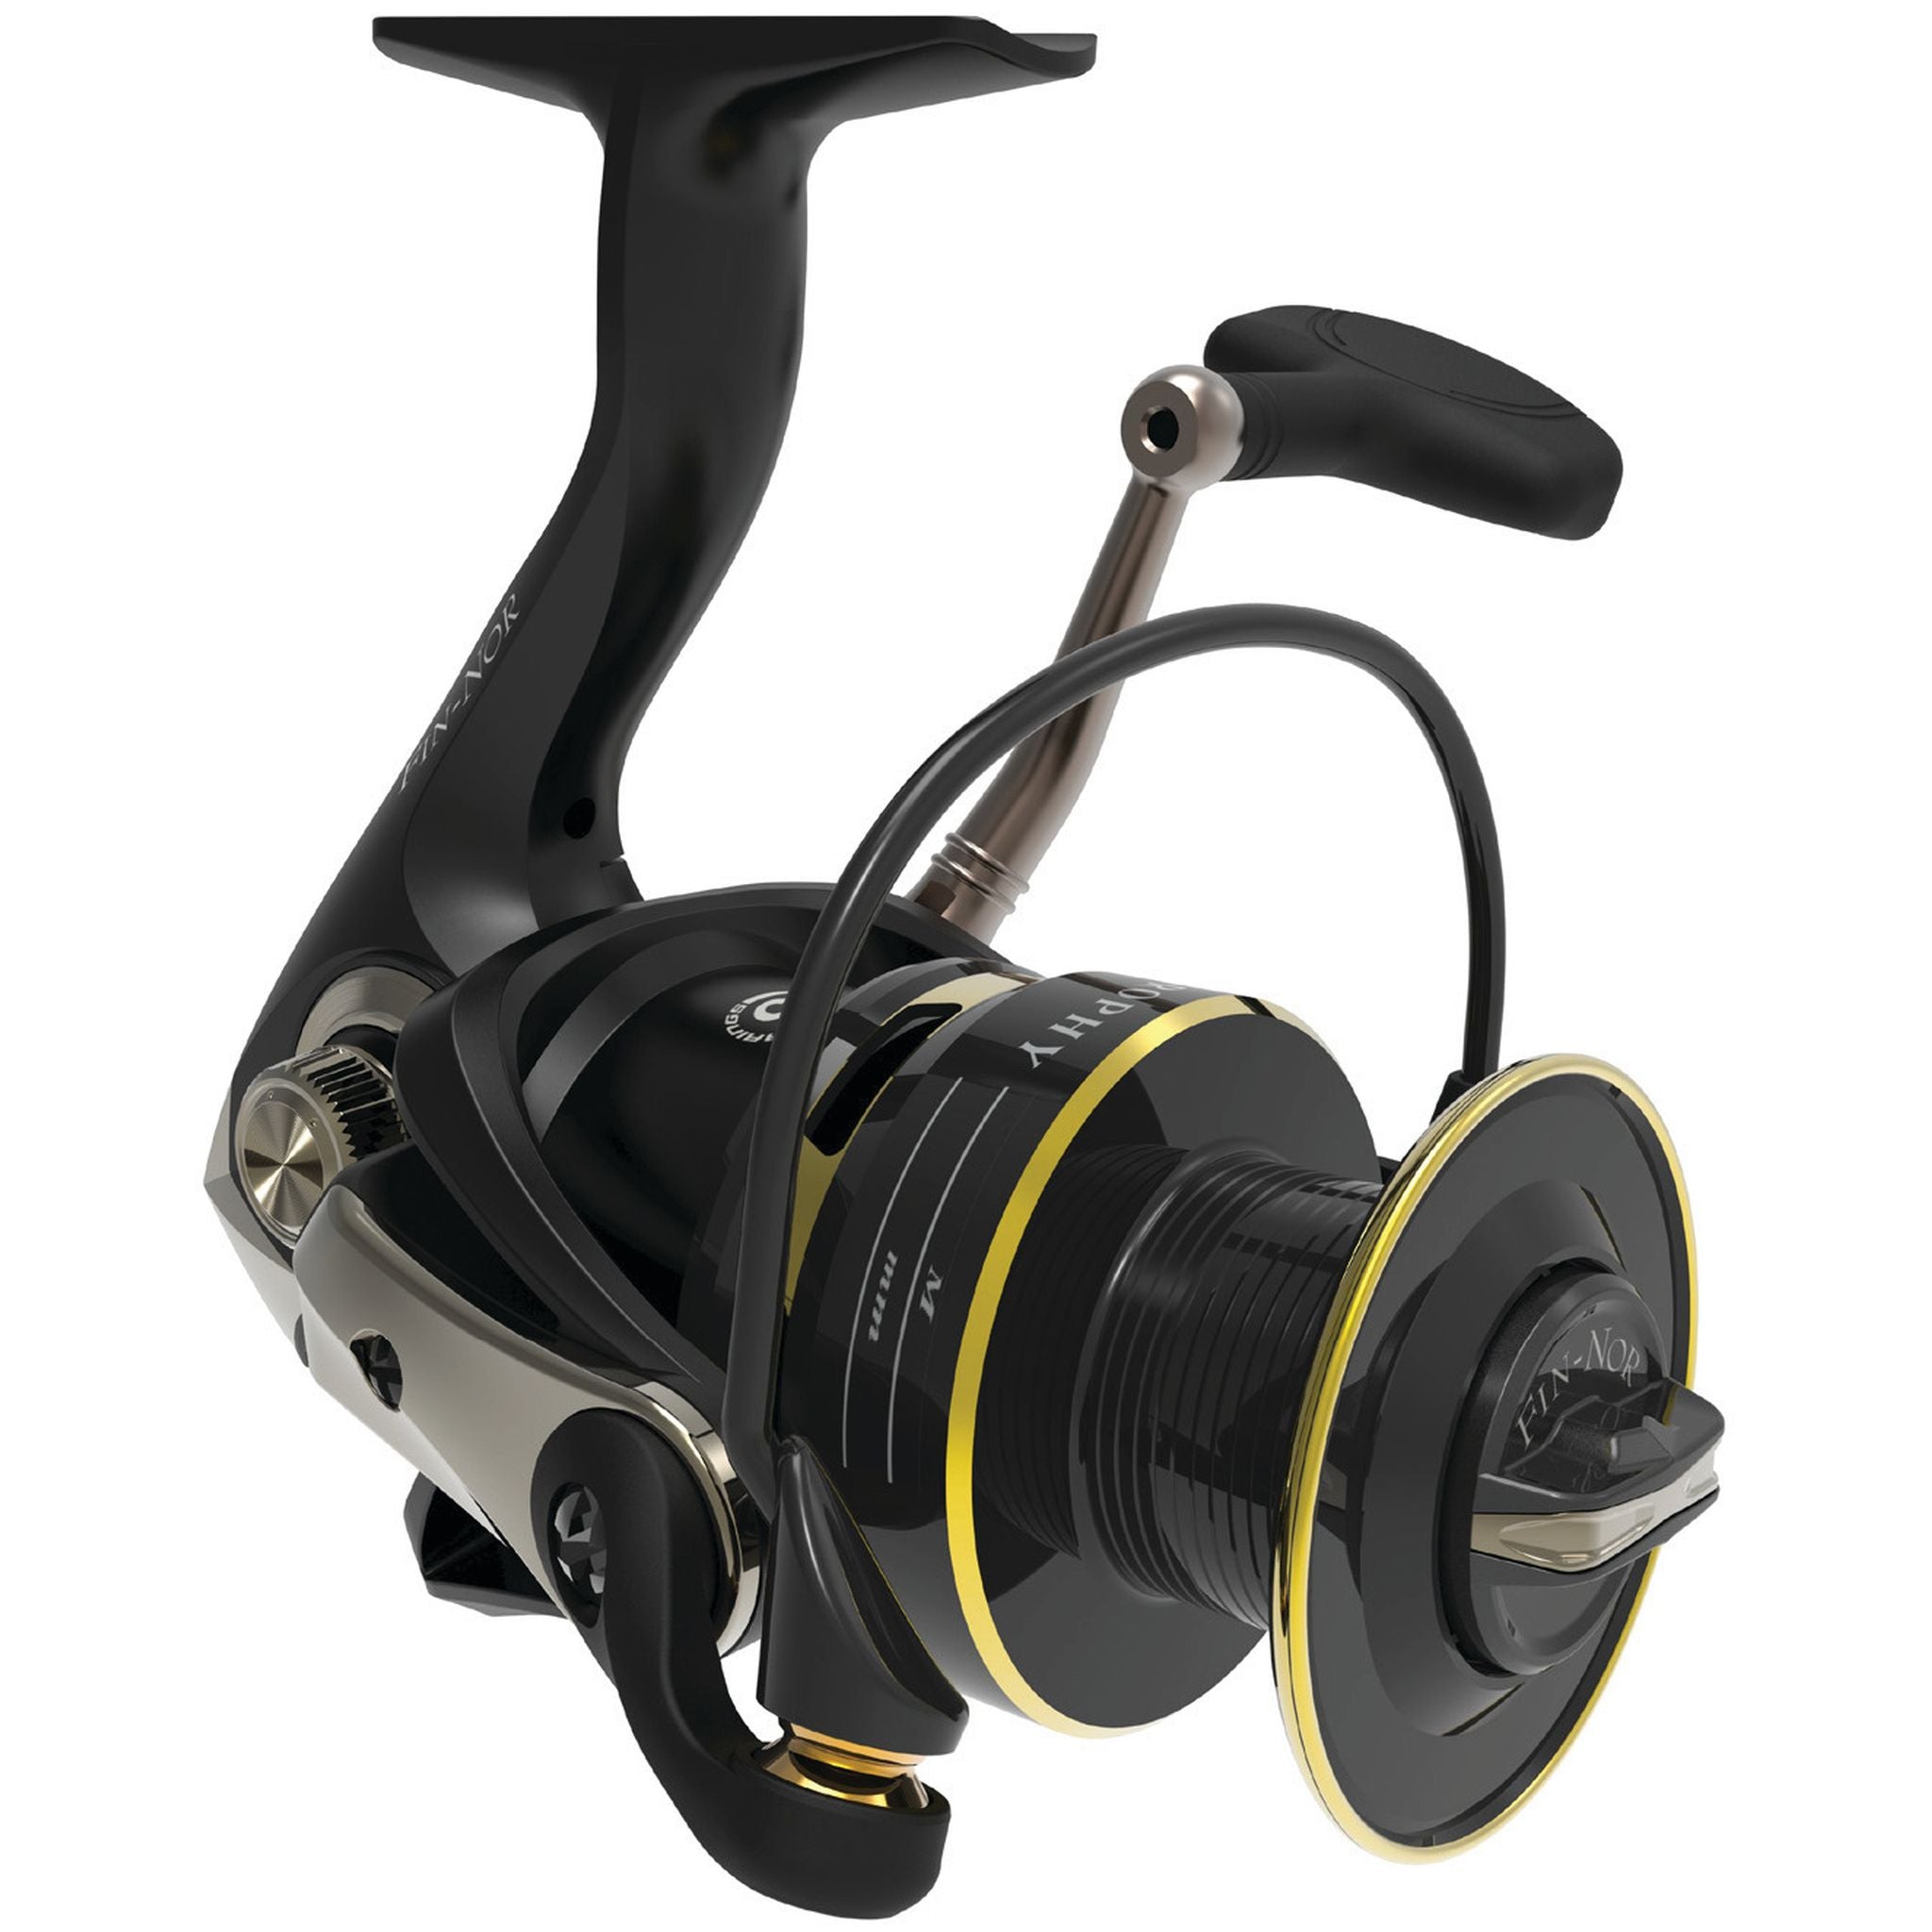 Fin-Nor Trophy TRO25 Spinning Fishing Reel